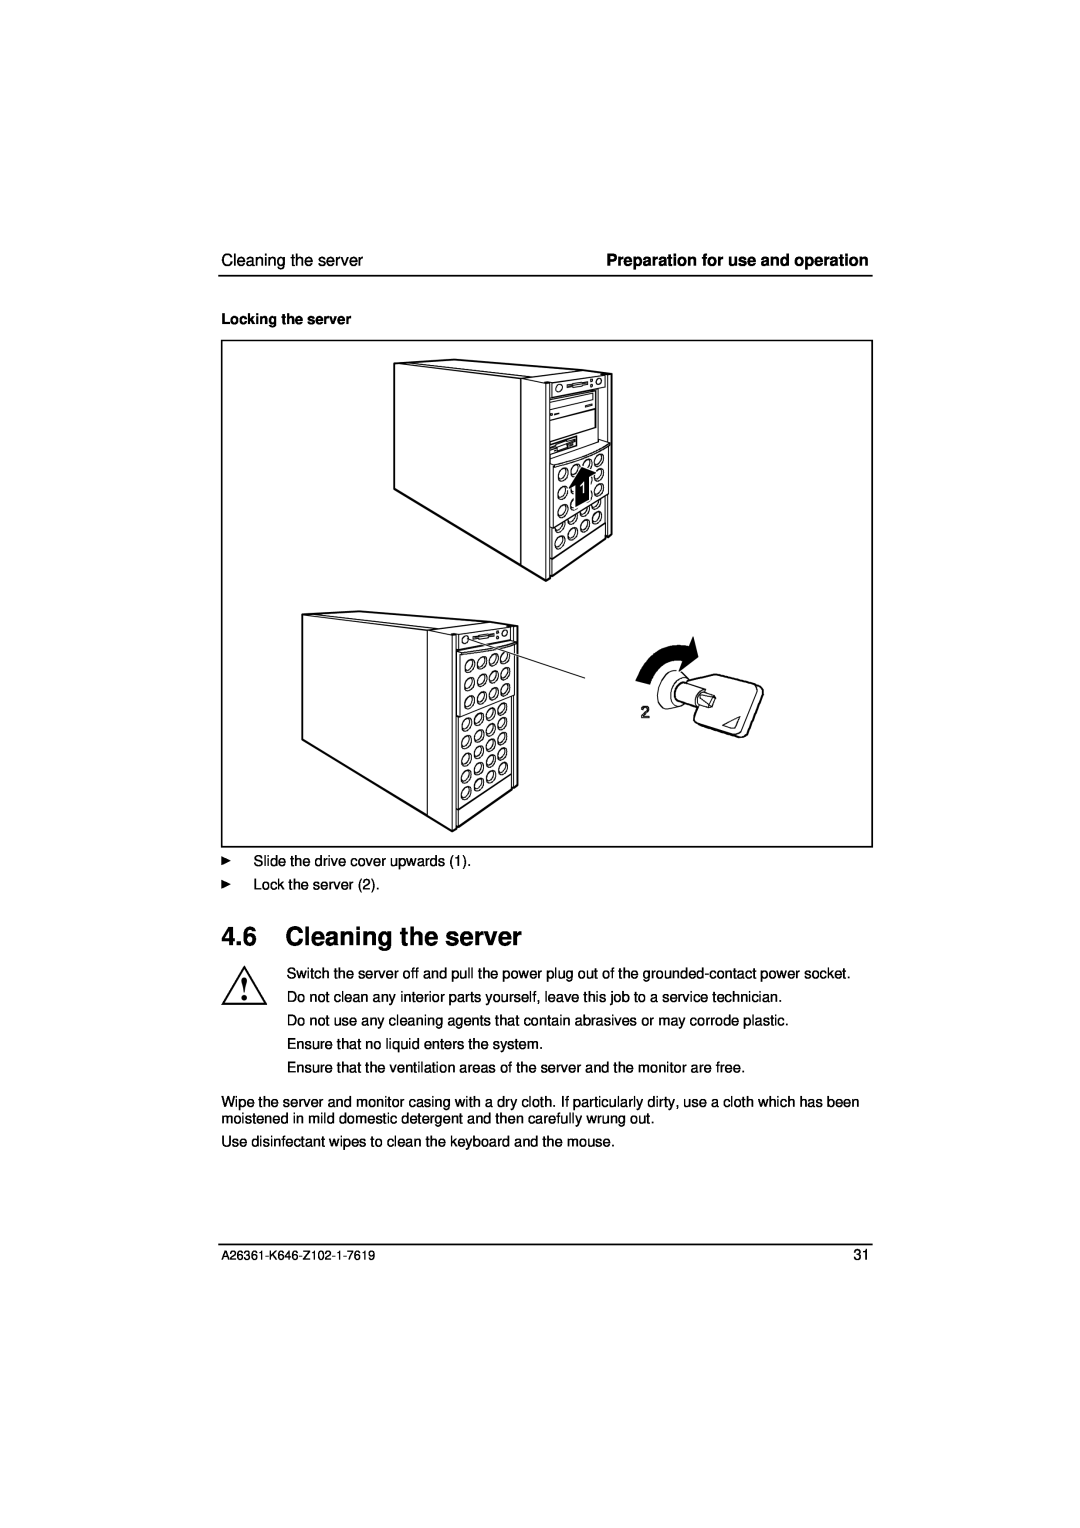 Fujitsu B120 manual Cleaning the server, Locking the server, Preparation for use and operation 